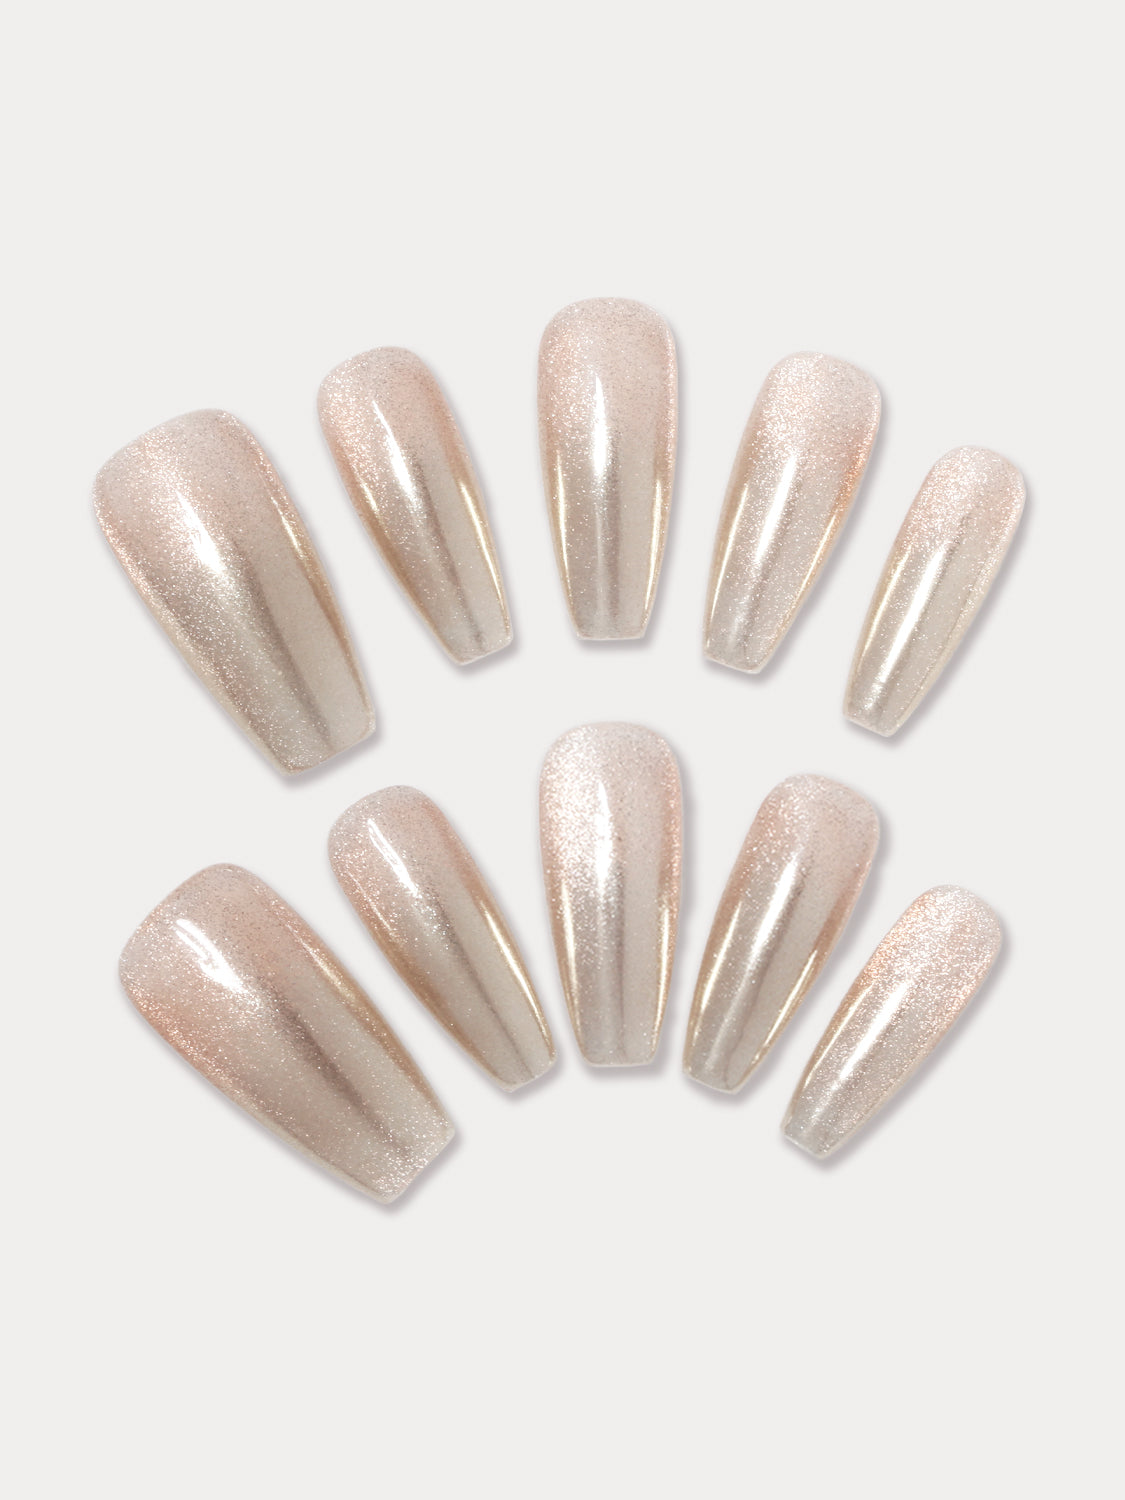 MIEAP glimmer nail set creates a gradient metallic mirror effect using silver chrome powder, with silver wide cat's eye gel applied at the nail roots. In low light, it twinkles subtly like stars, while in strong light, it reveals a dazzling diamond-like brilliance. #MIEAPnails #pressonnail #acrylicnail #nails #nailart #naildesign #nailinspo #handmadenail #summernail #nail2023 #graduationnail #chromenail  #datingnail #promnail